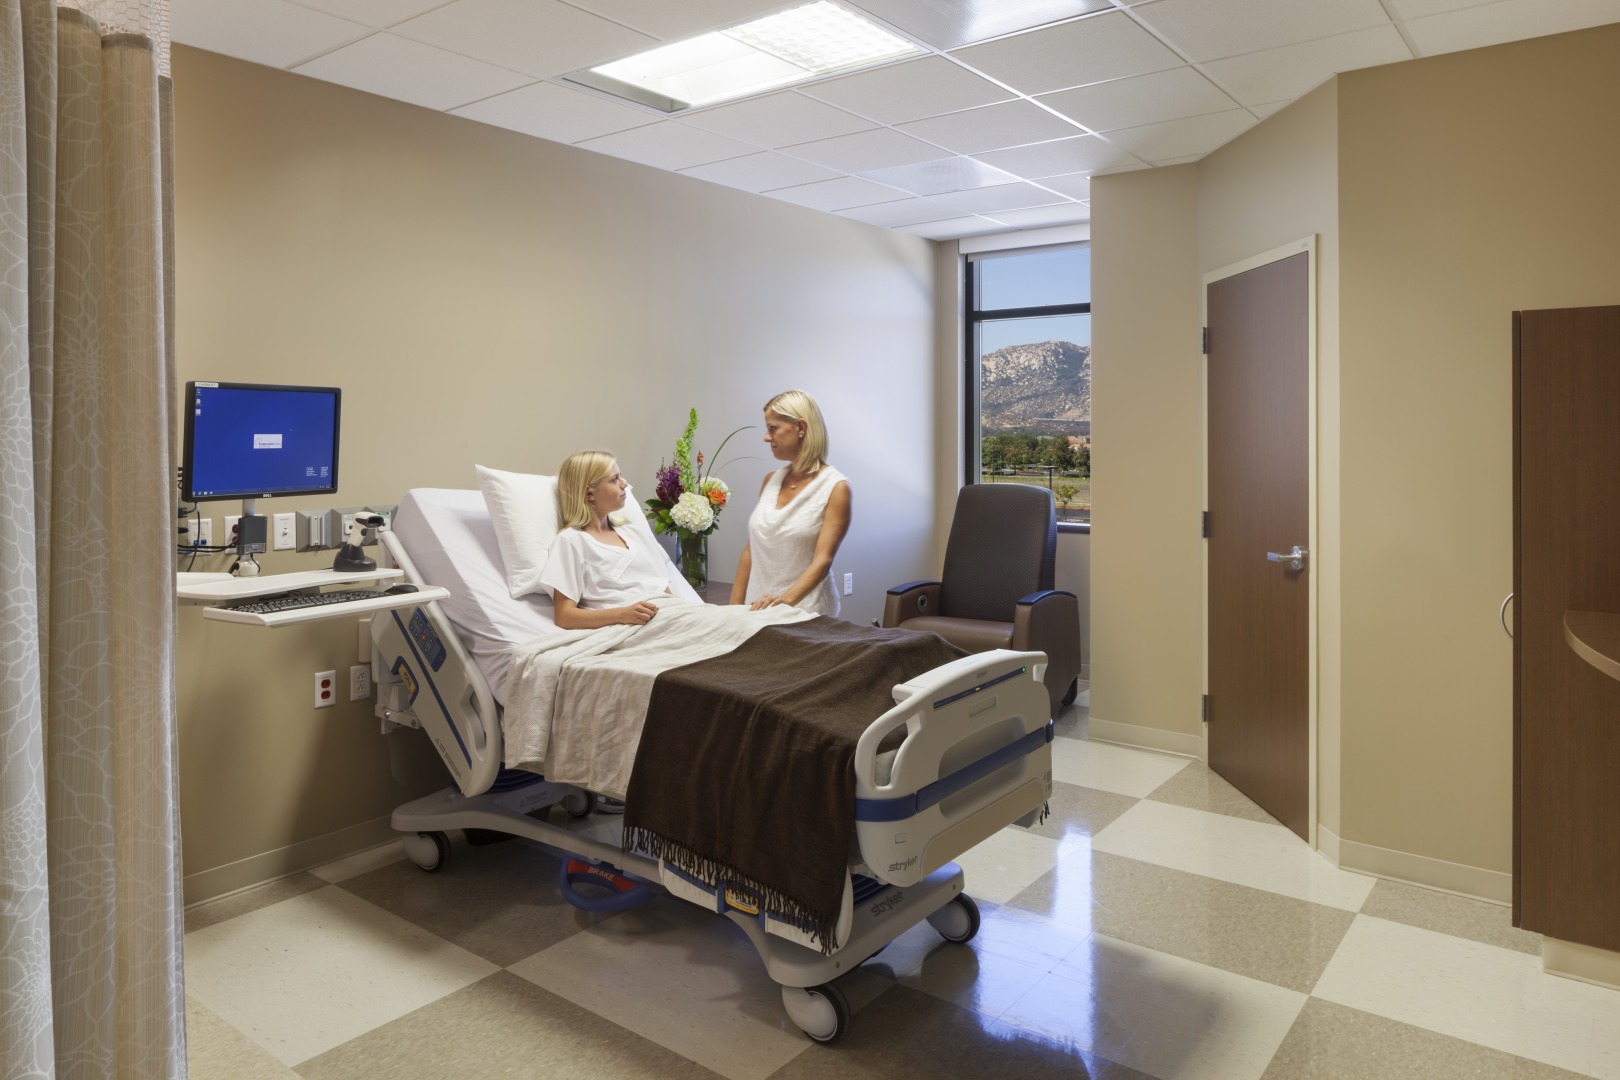 Healthcare facility design is patient-centric.